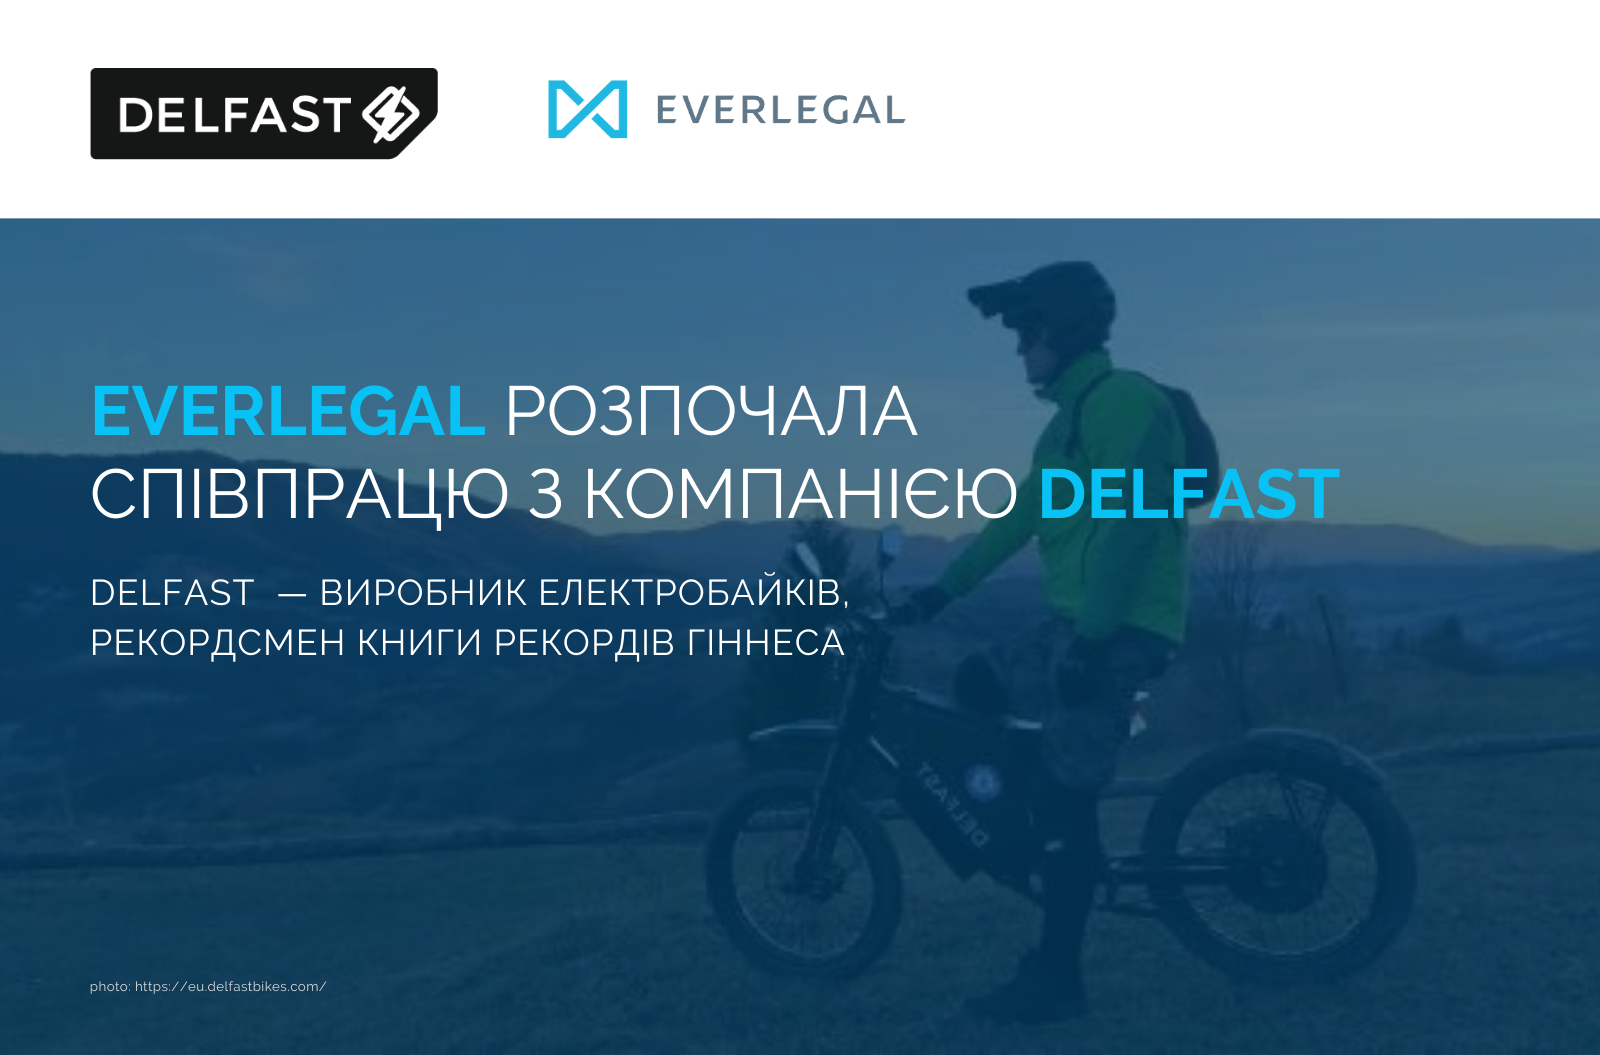 EVERLEGAL is a legal partner of DELFAST